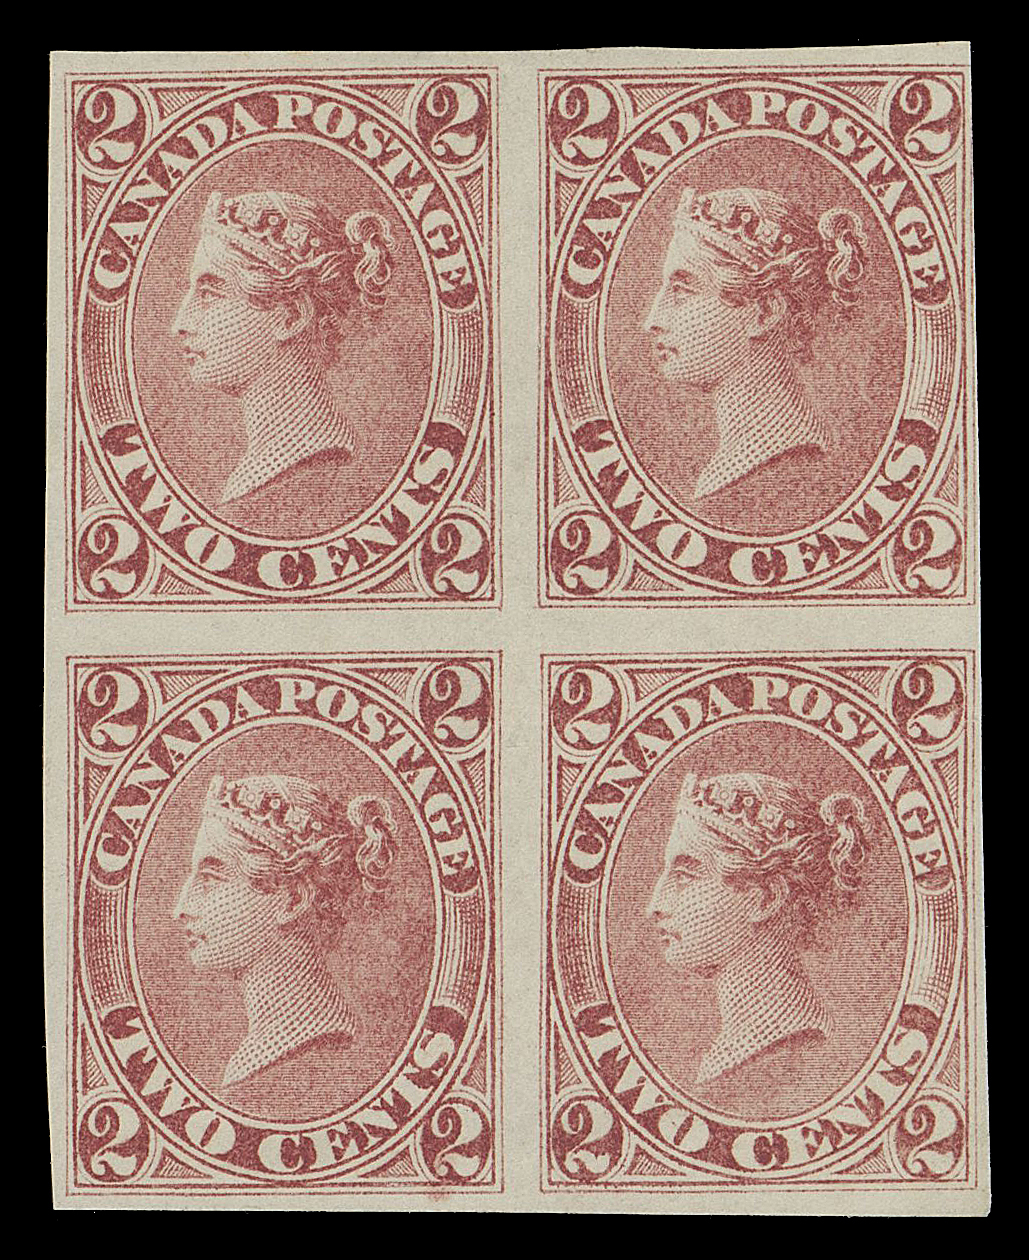 TWO CENTS  20b,A mint imperforate block in the distinctive shade on wove paper, large margins on three sides and clear to just touching at top right, ungummed as normally encountered. A very scarce imperforate block from the sole sheet printed, Fine+

Expertization: 2008 Greene Foundation certificate

Provenance: Captain Vivian Hewitt, Robson Lowe Ltd., December 1968; Lot 1050